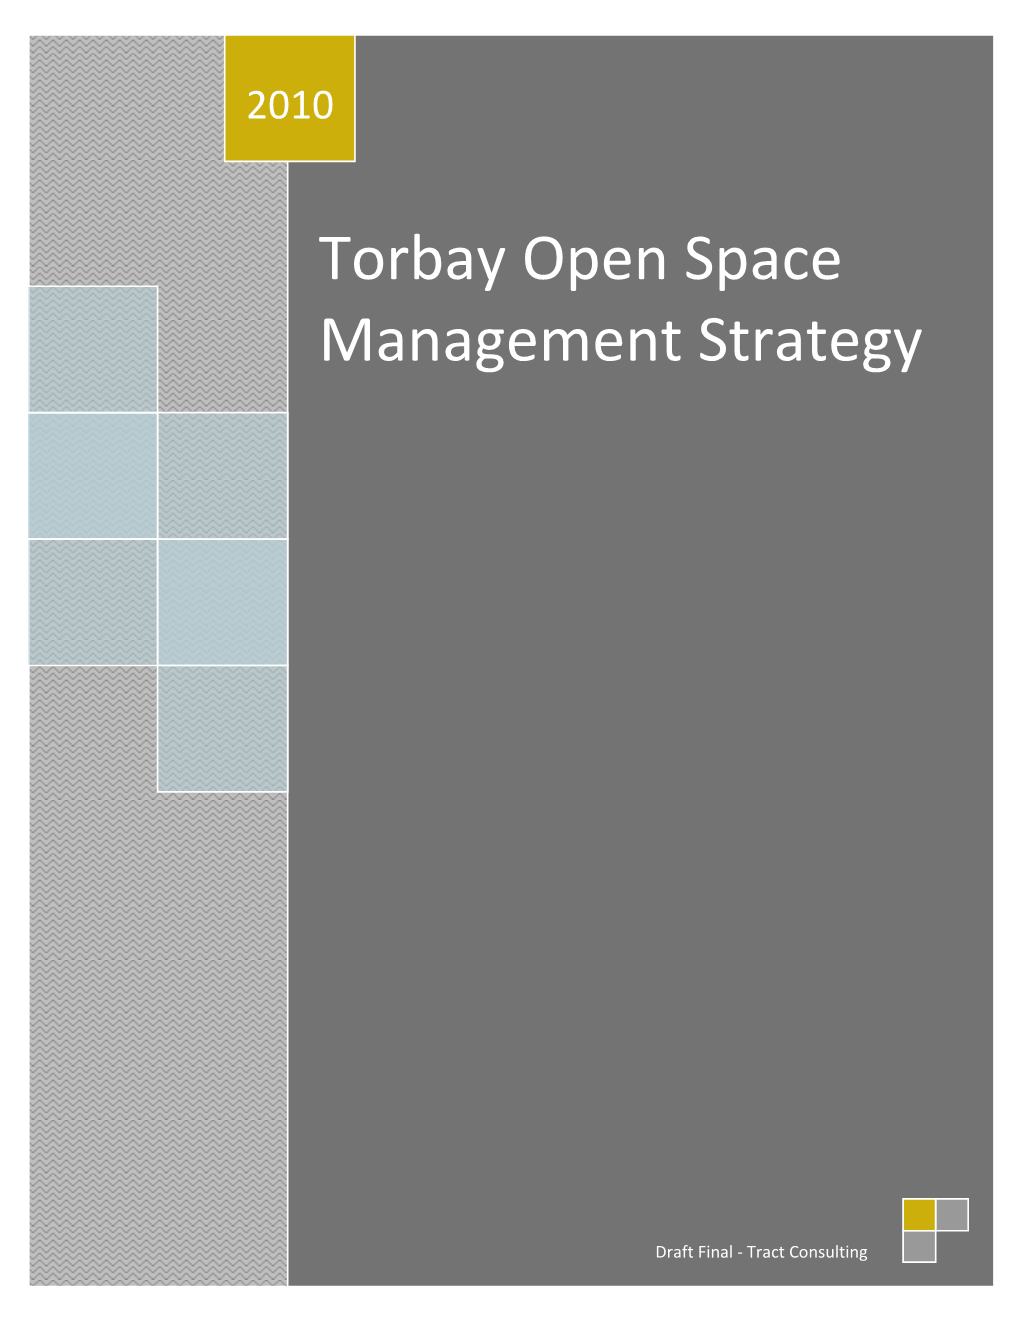 Torbay Open Space Management Strategy